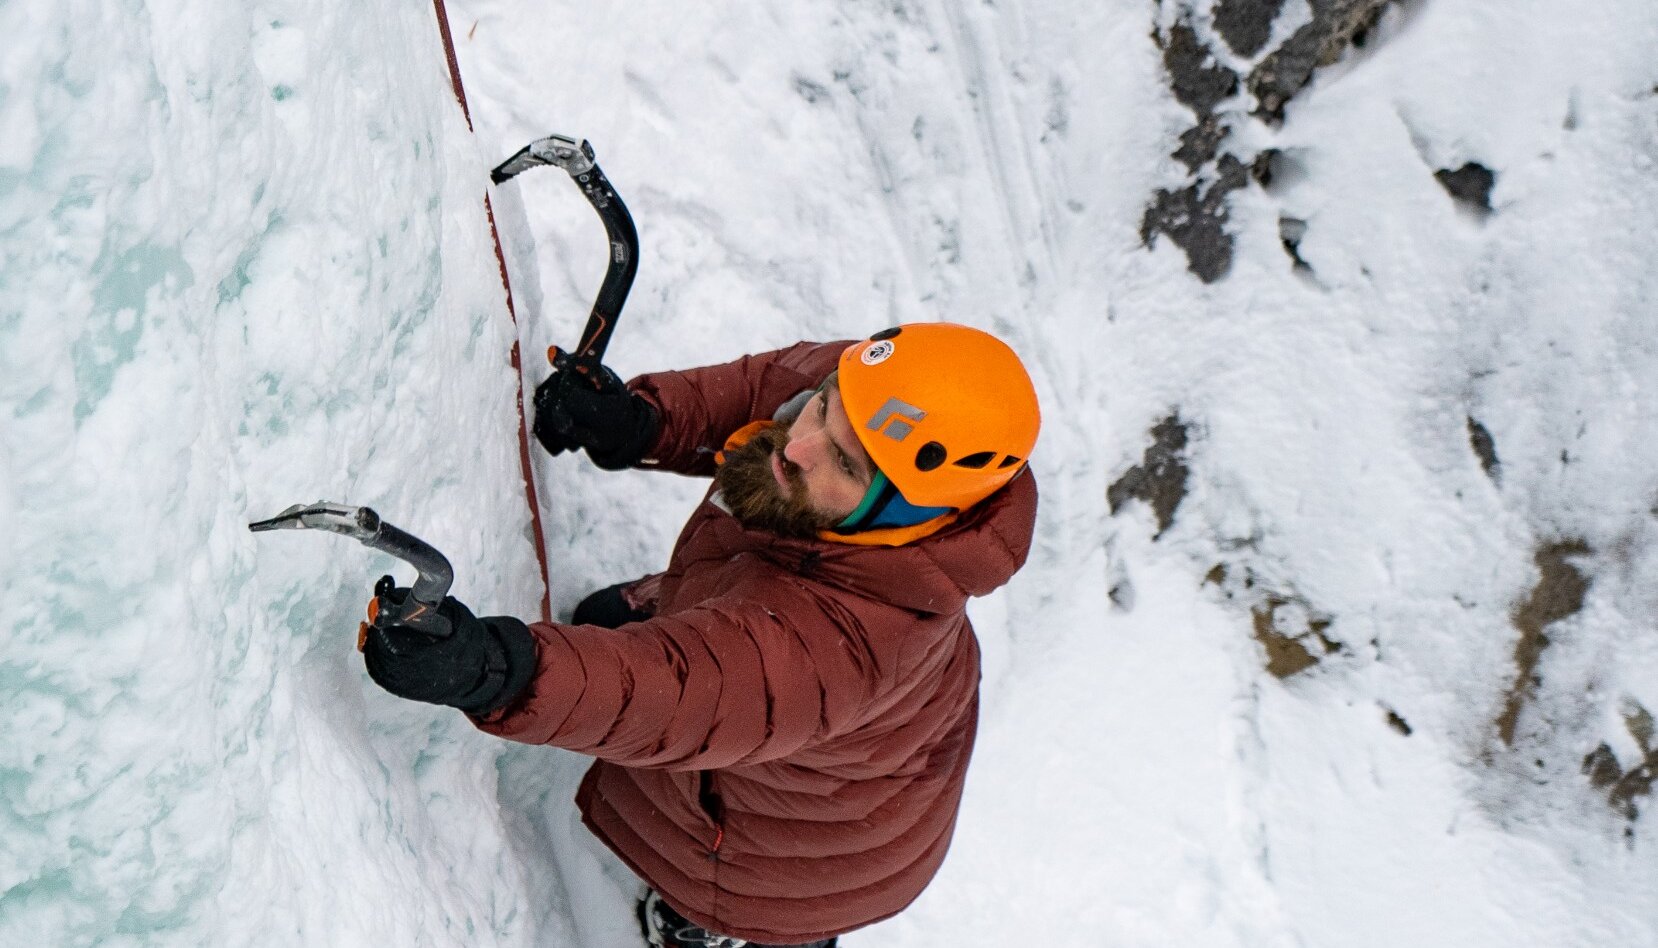 Ice climbing in Banff National Park